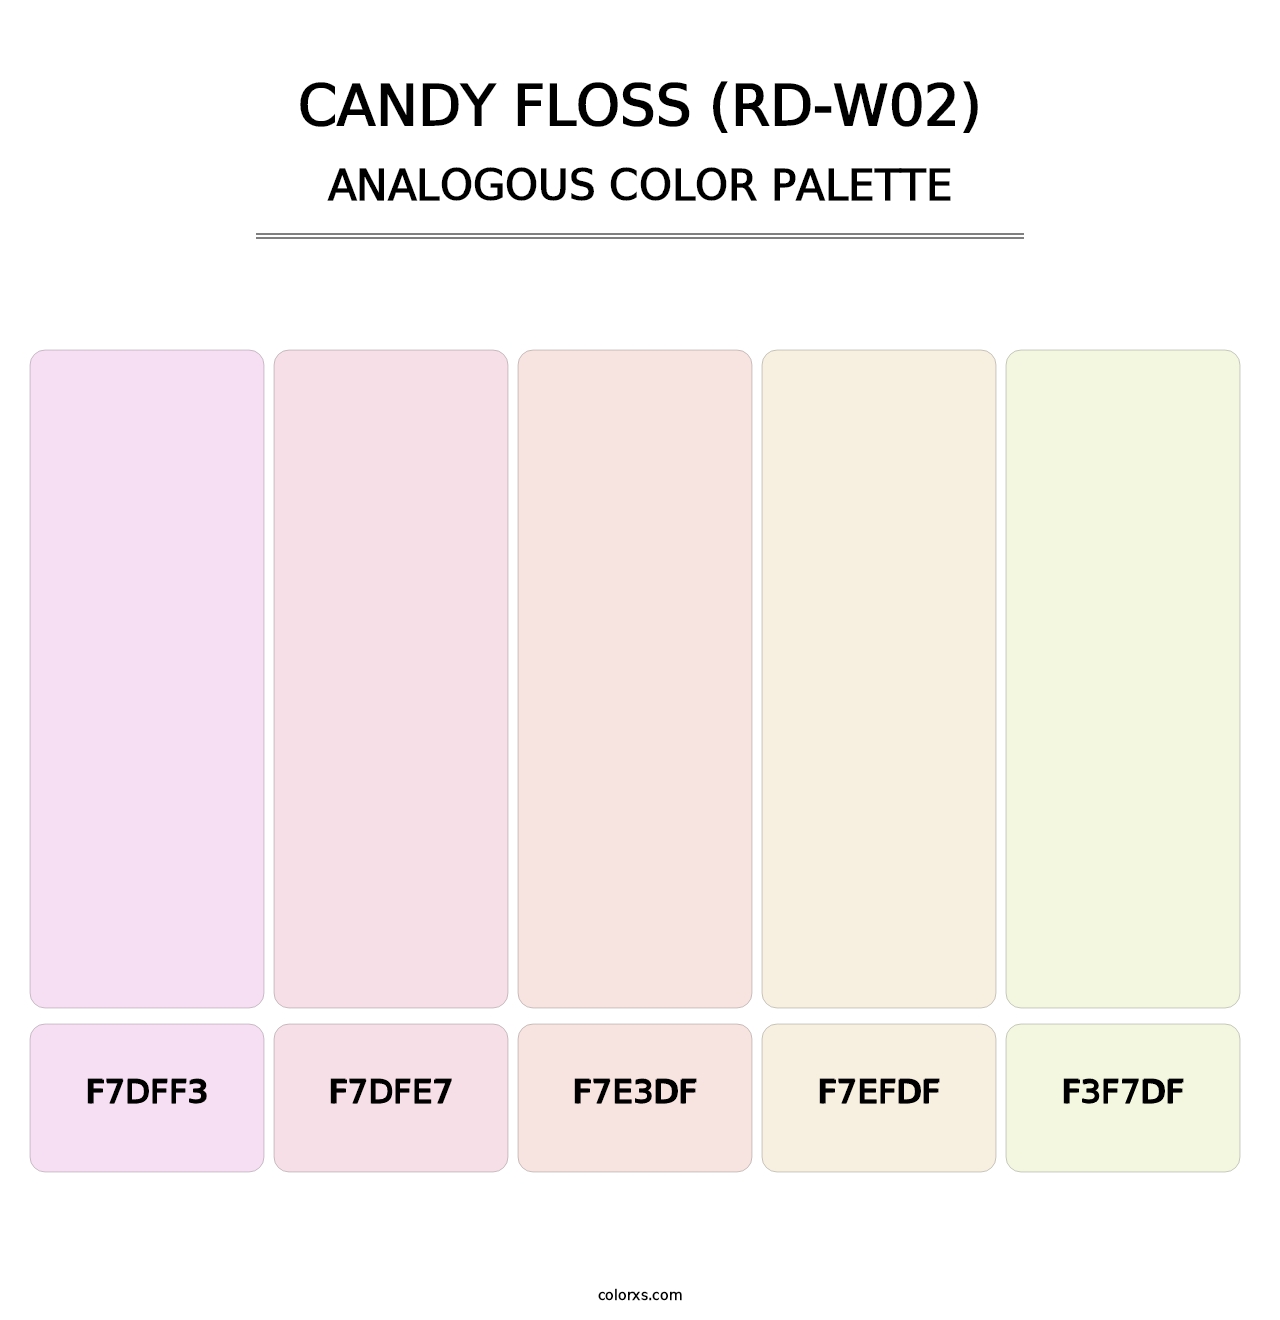 Candy Floss (RD-W02) - Analogous Color Palette